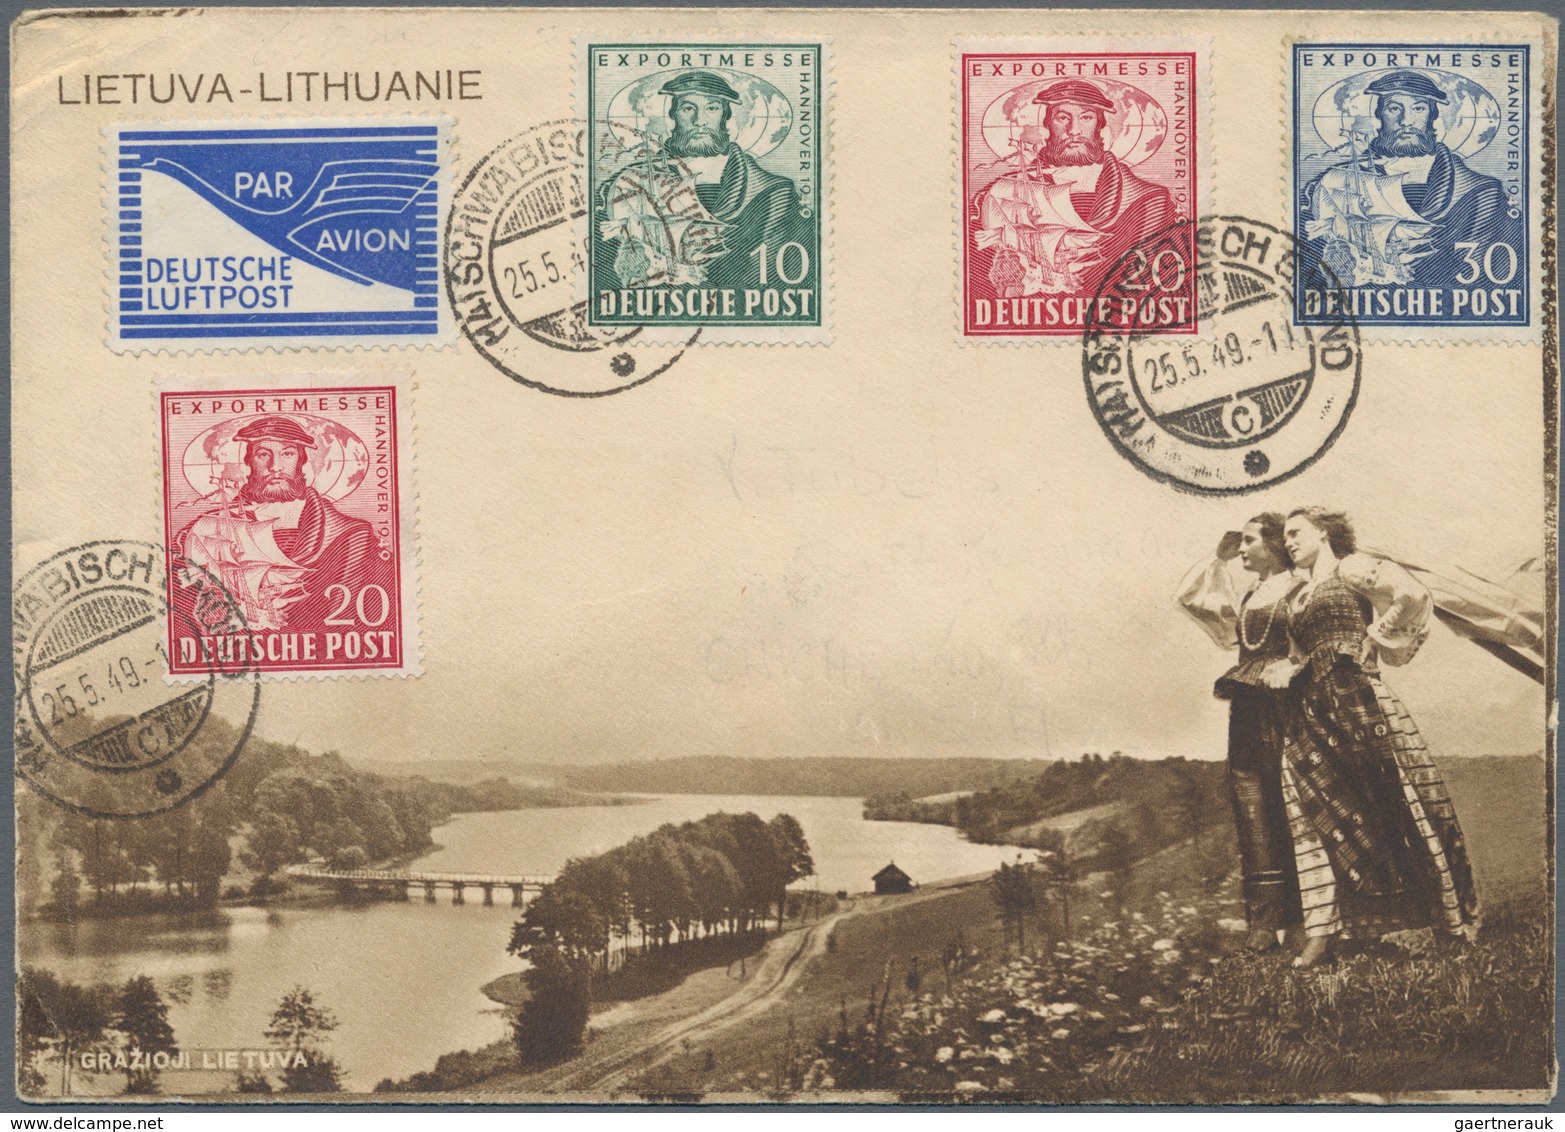 Litauen: 1919-1940's ca.: About 150 covers and postcards from various post offices in Lithuania, mos